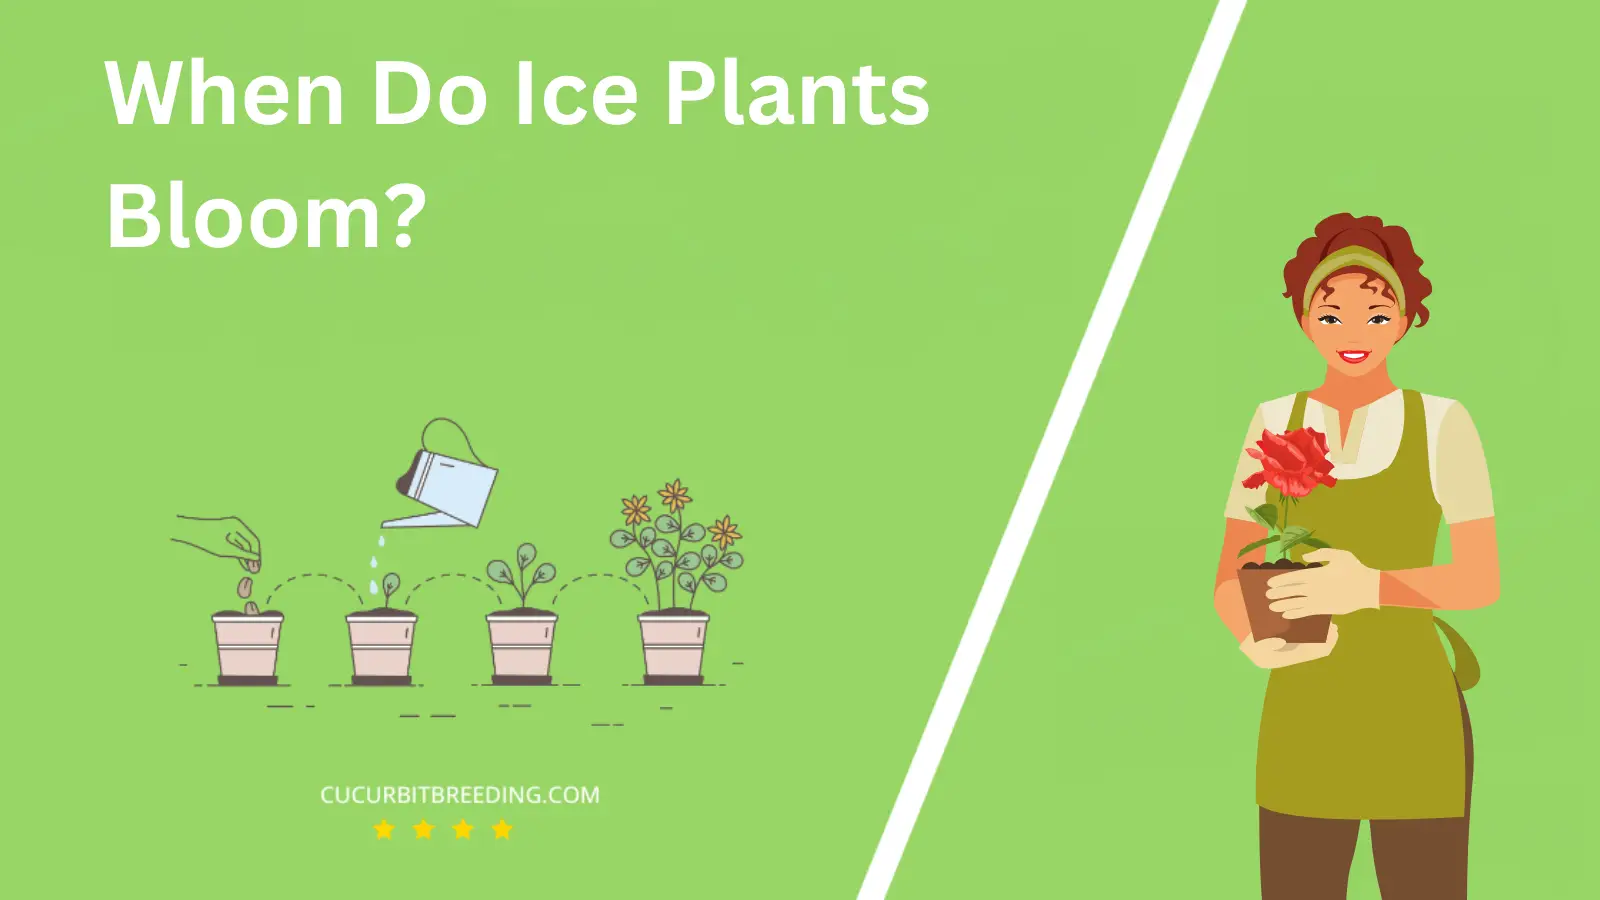 When Do Ice Plants Bloom?